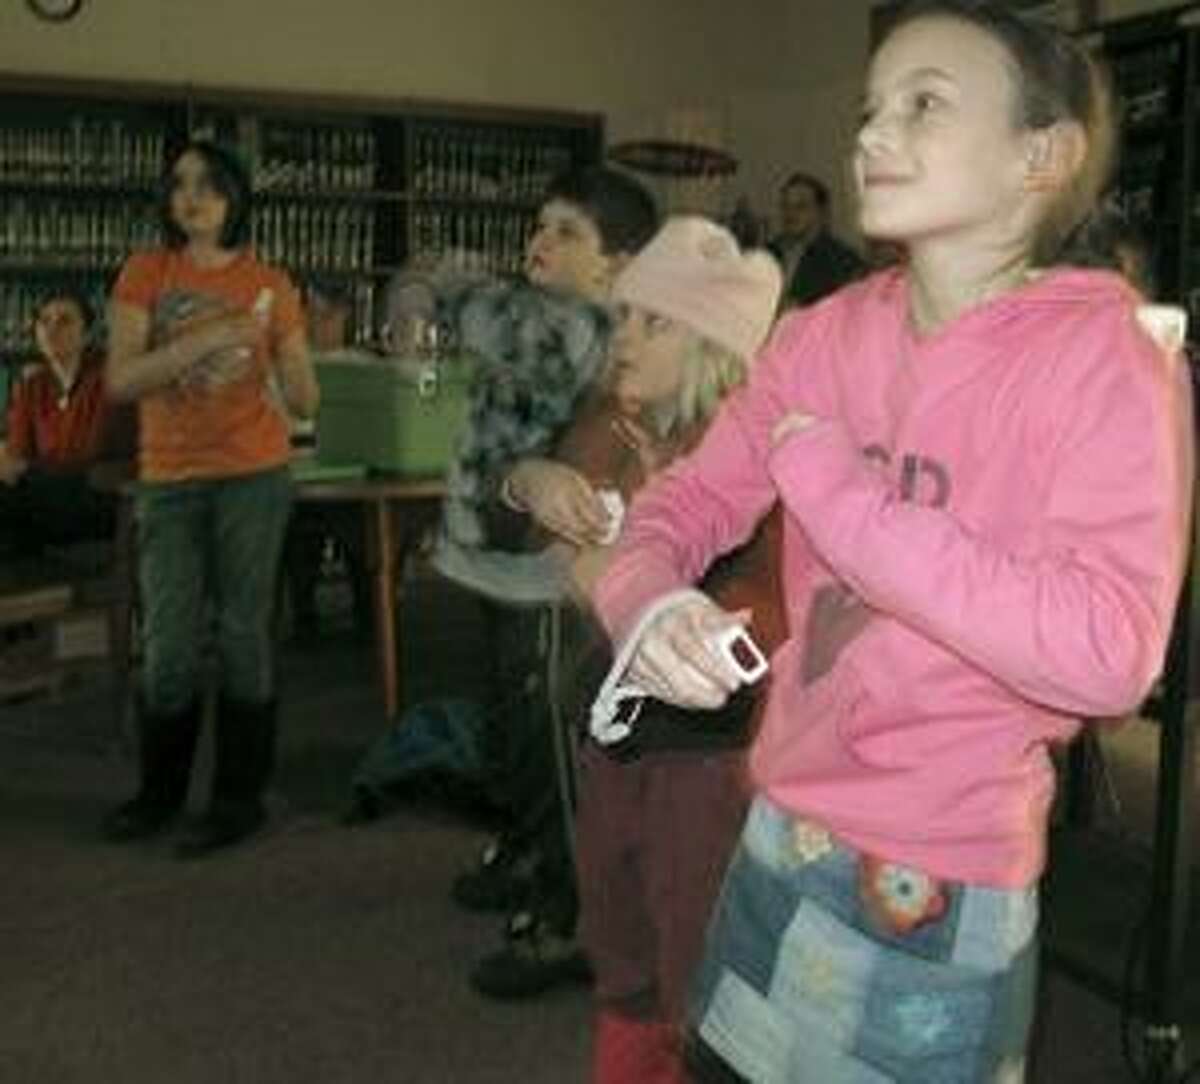 Photo by JOHN HAEGER Morgan Carroll, 8, of Oneida, plays the Wii at the Oneida Piblic Library on Monday, Jan. 10, 2011. The library's Wii multi-generational games program is offered monthly to bring together children savvy in the latest technology together with their older relatives who may need extra coaching.